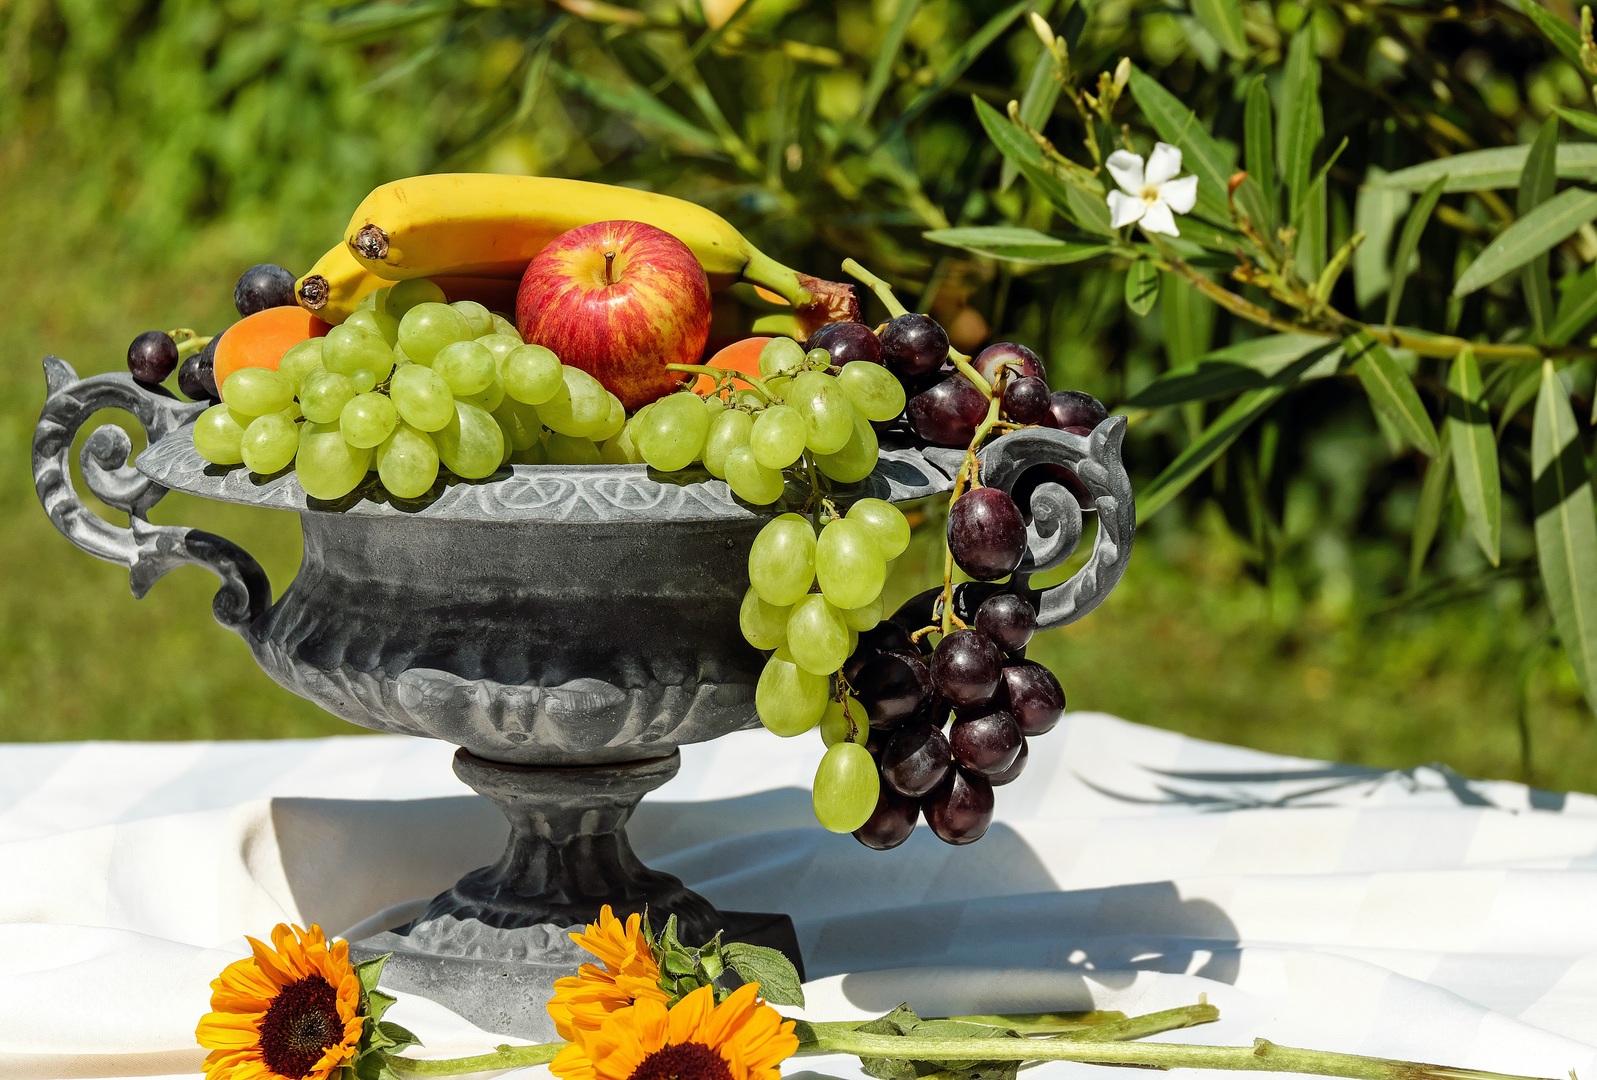 Grapes are a non-climacteric type of fruit